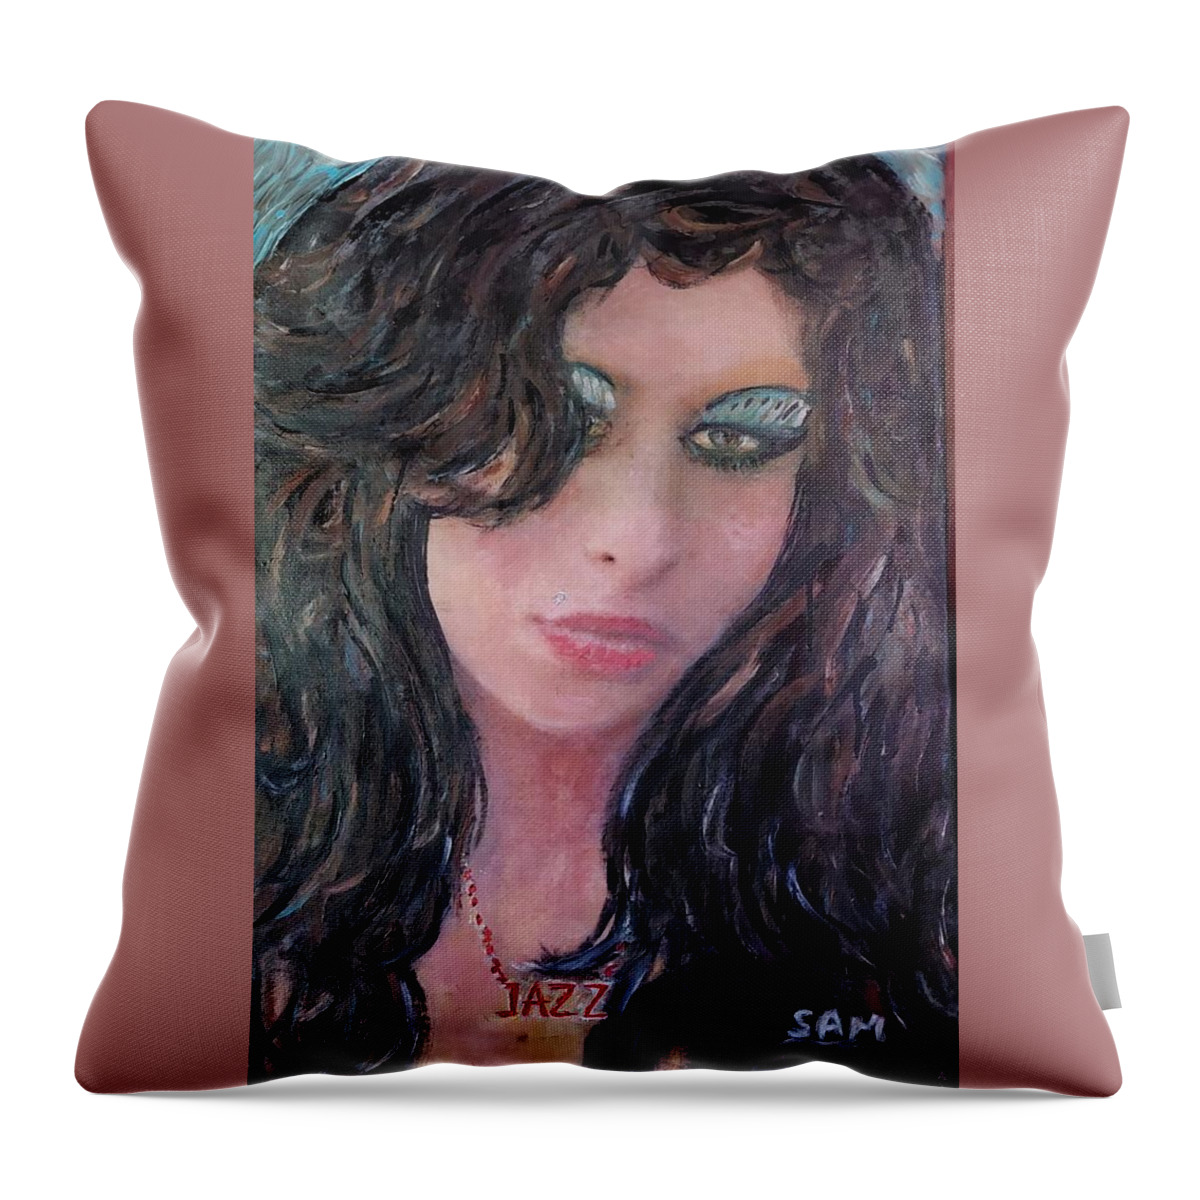 Portrait Throw Pillow featuring the painting Amy #3 by Sam Shaker